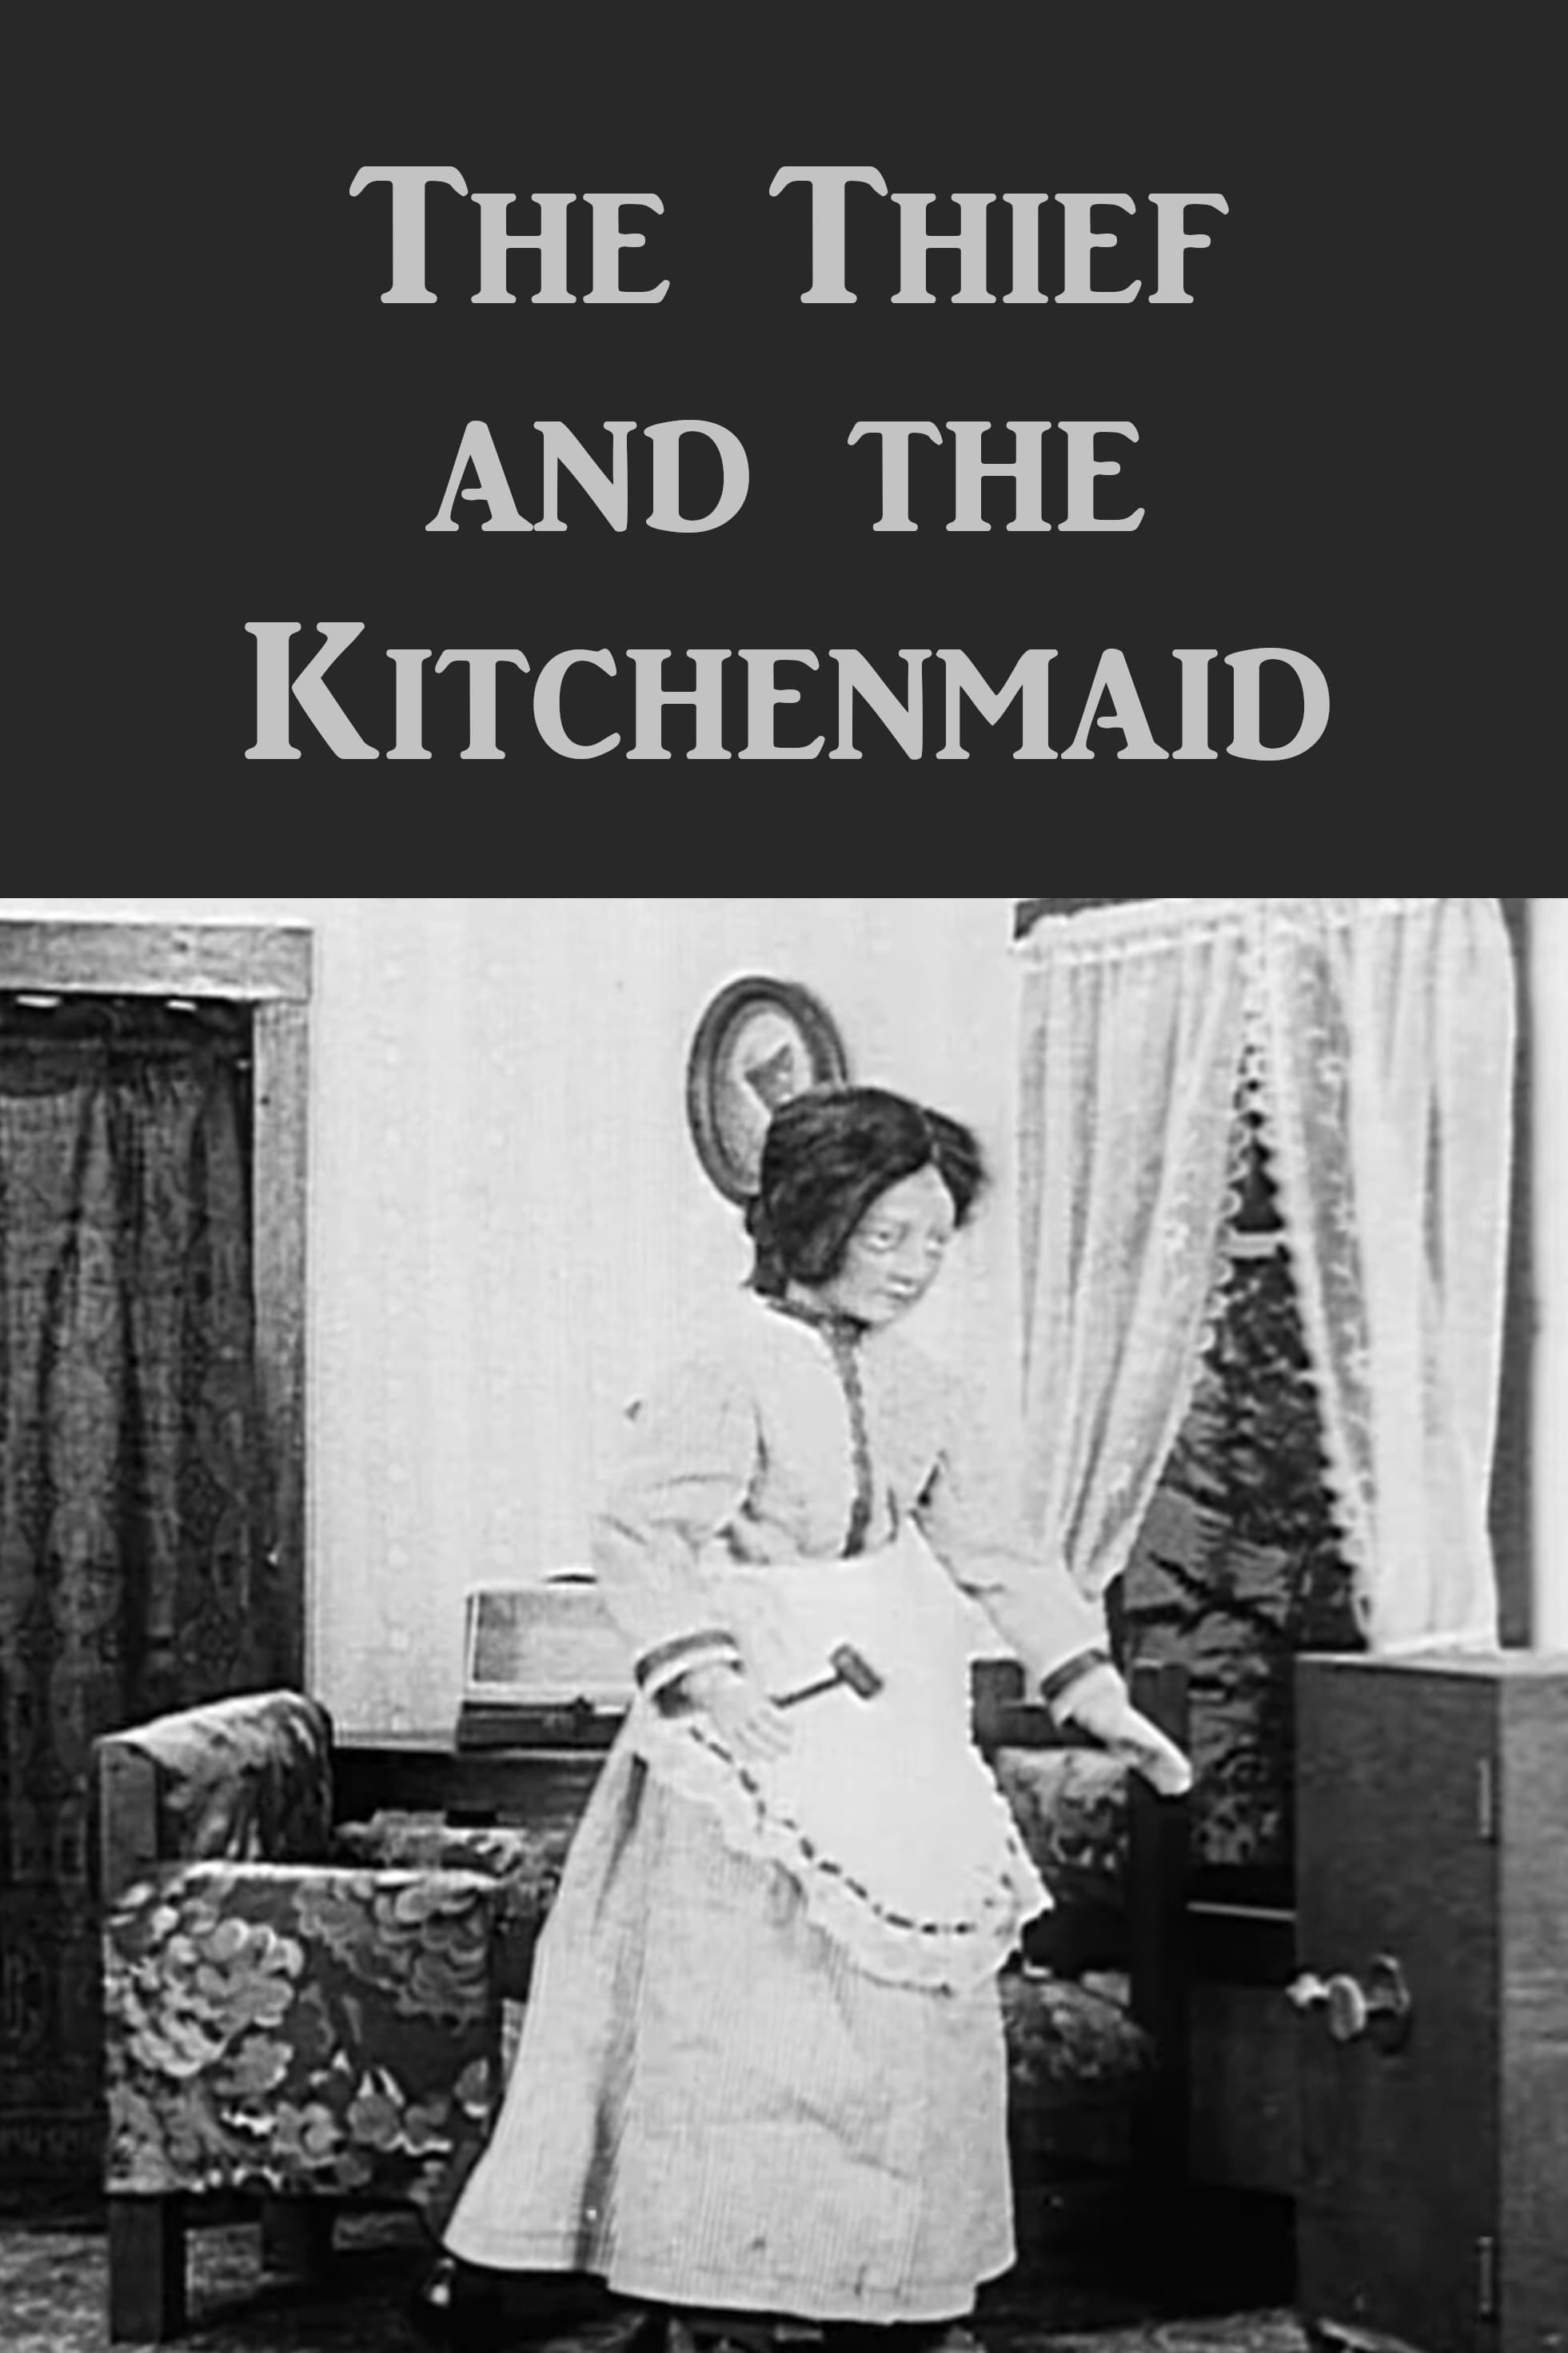 The Thief and the Kitchenmaid